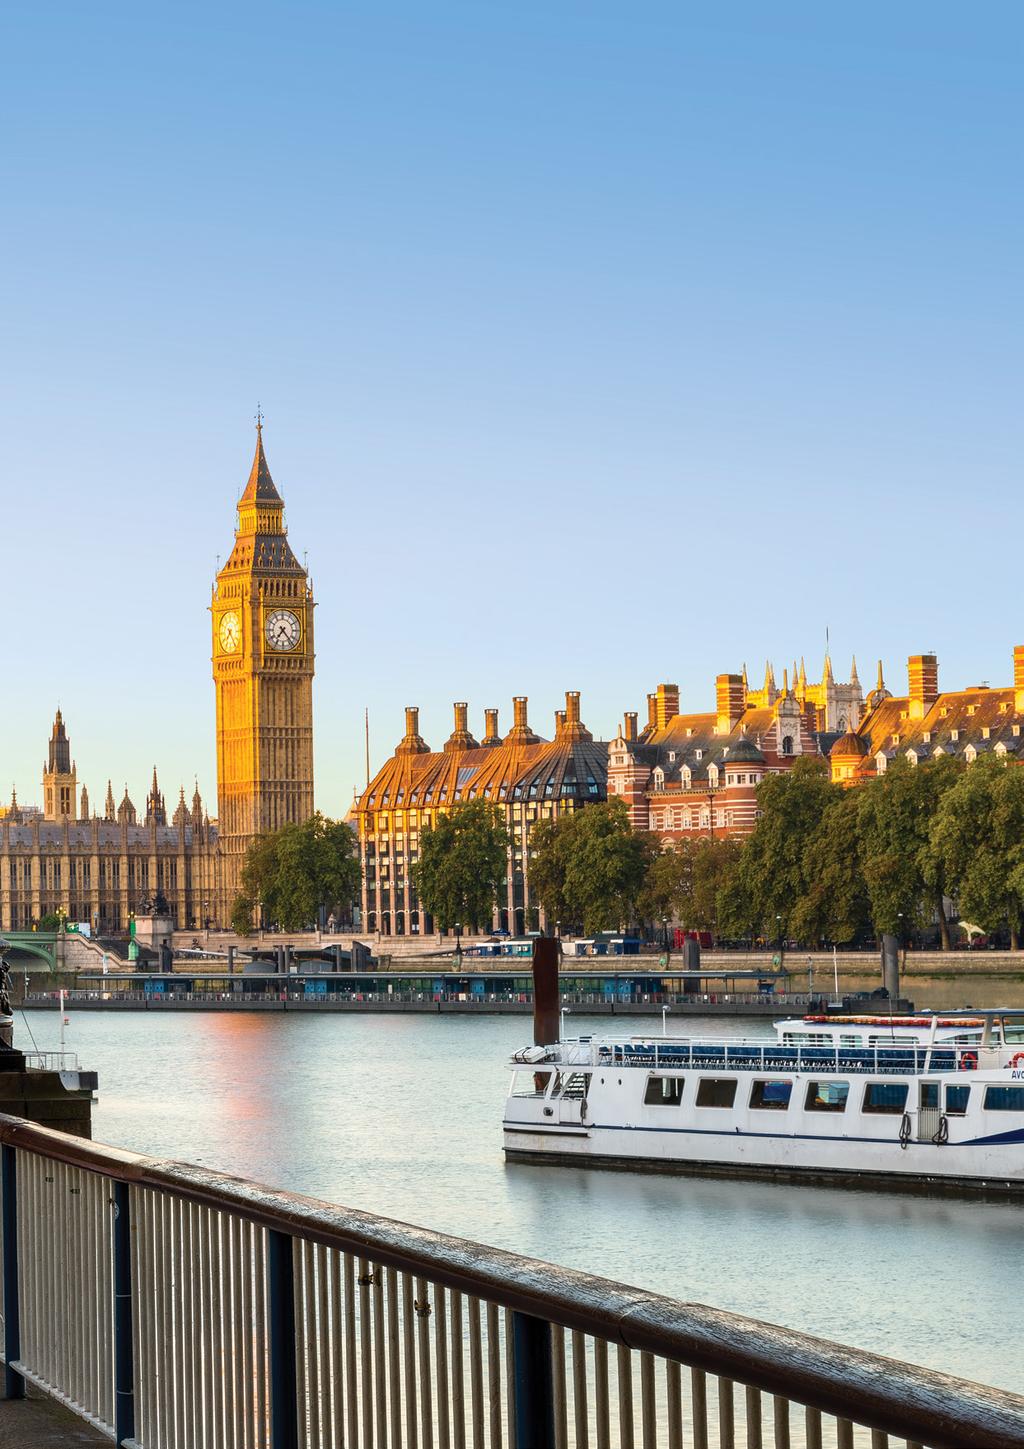 Tourism Trends 2015 02 London received 18.6 million overseas visits in 2015, spending 11.9 billion both record highs.